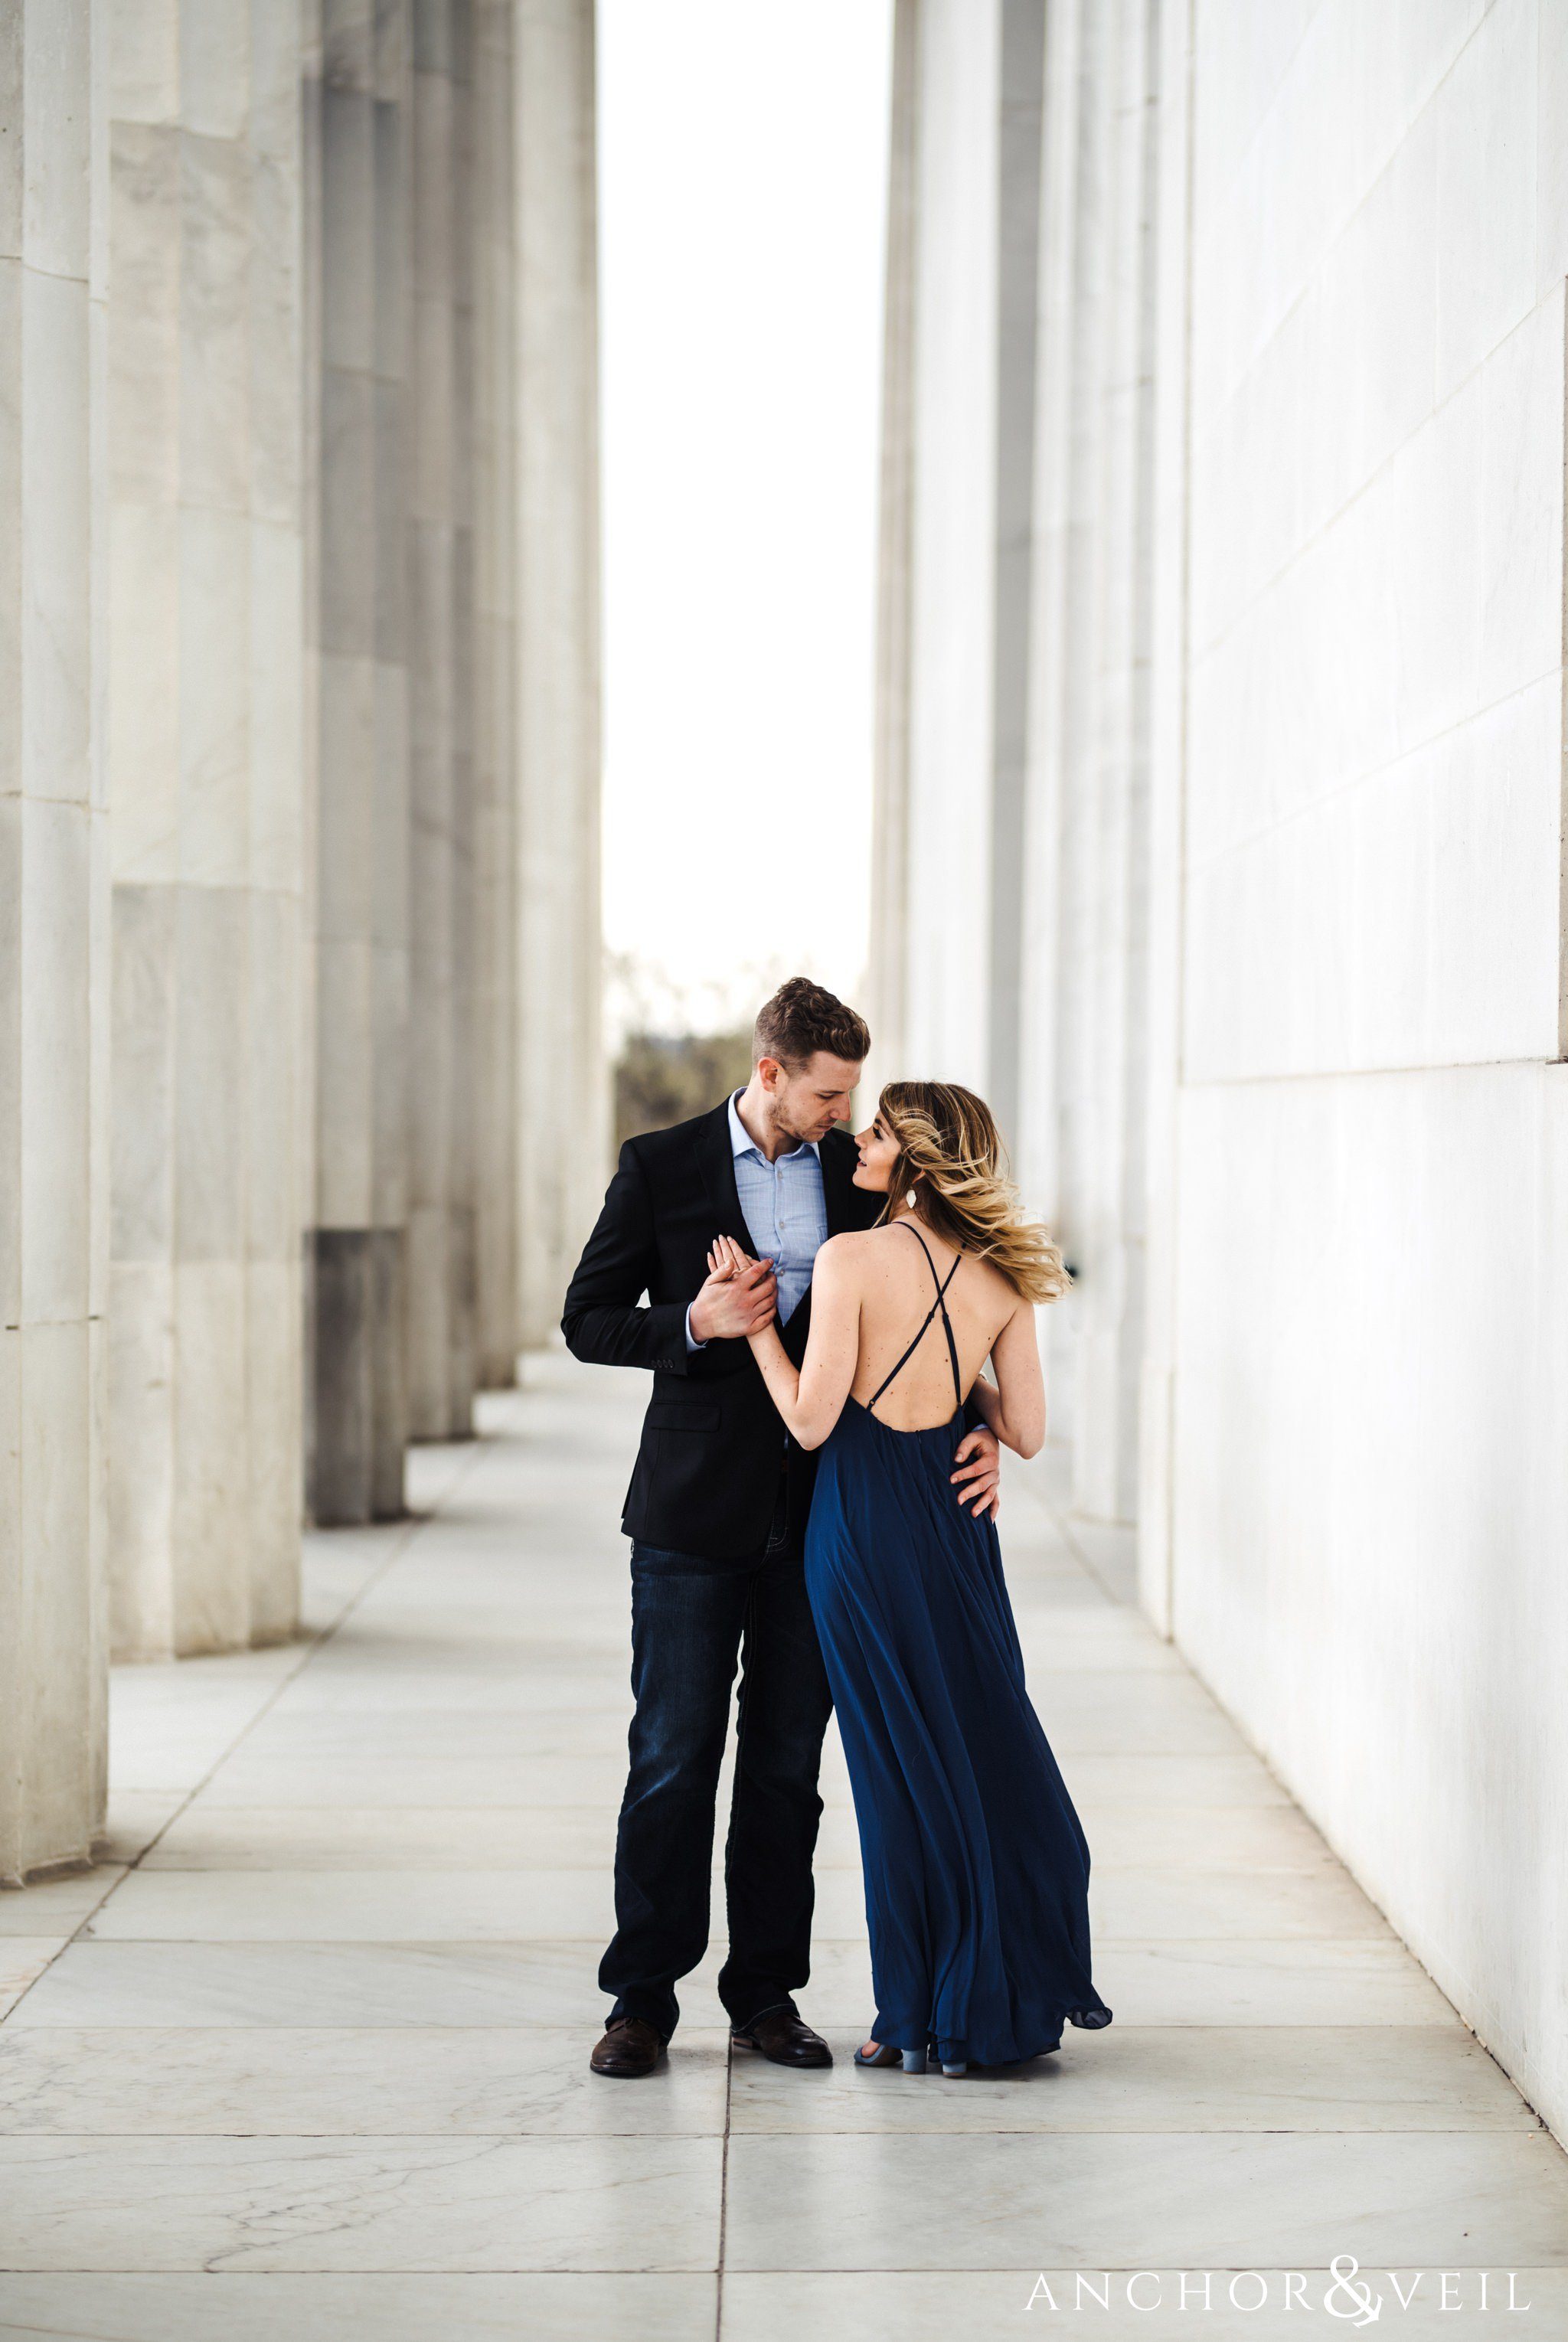 Lincoln memorial pillars during their Scenic Washington DC Engagement Session